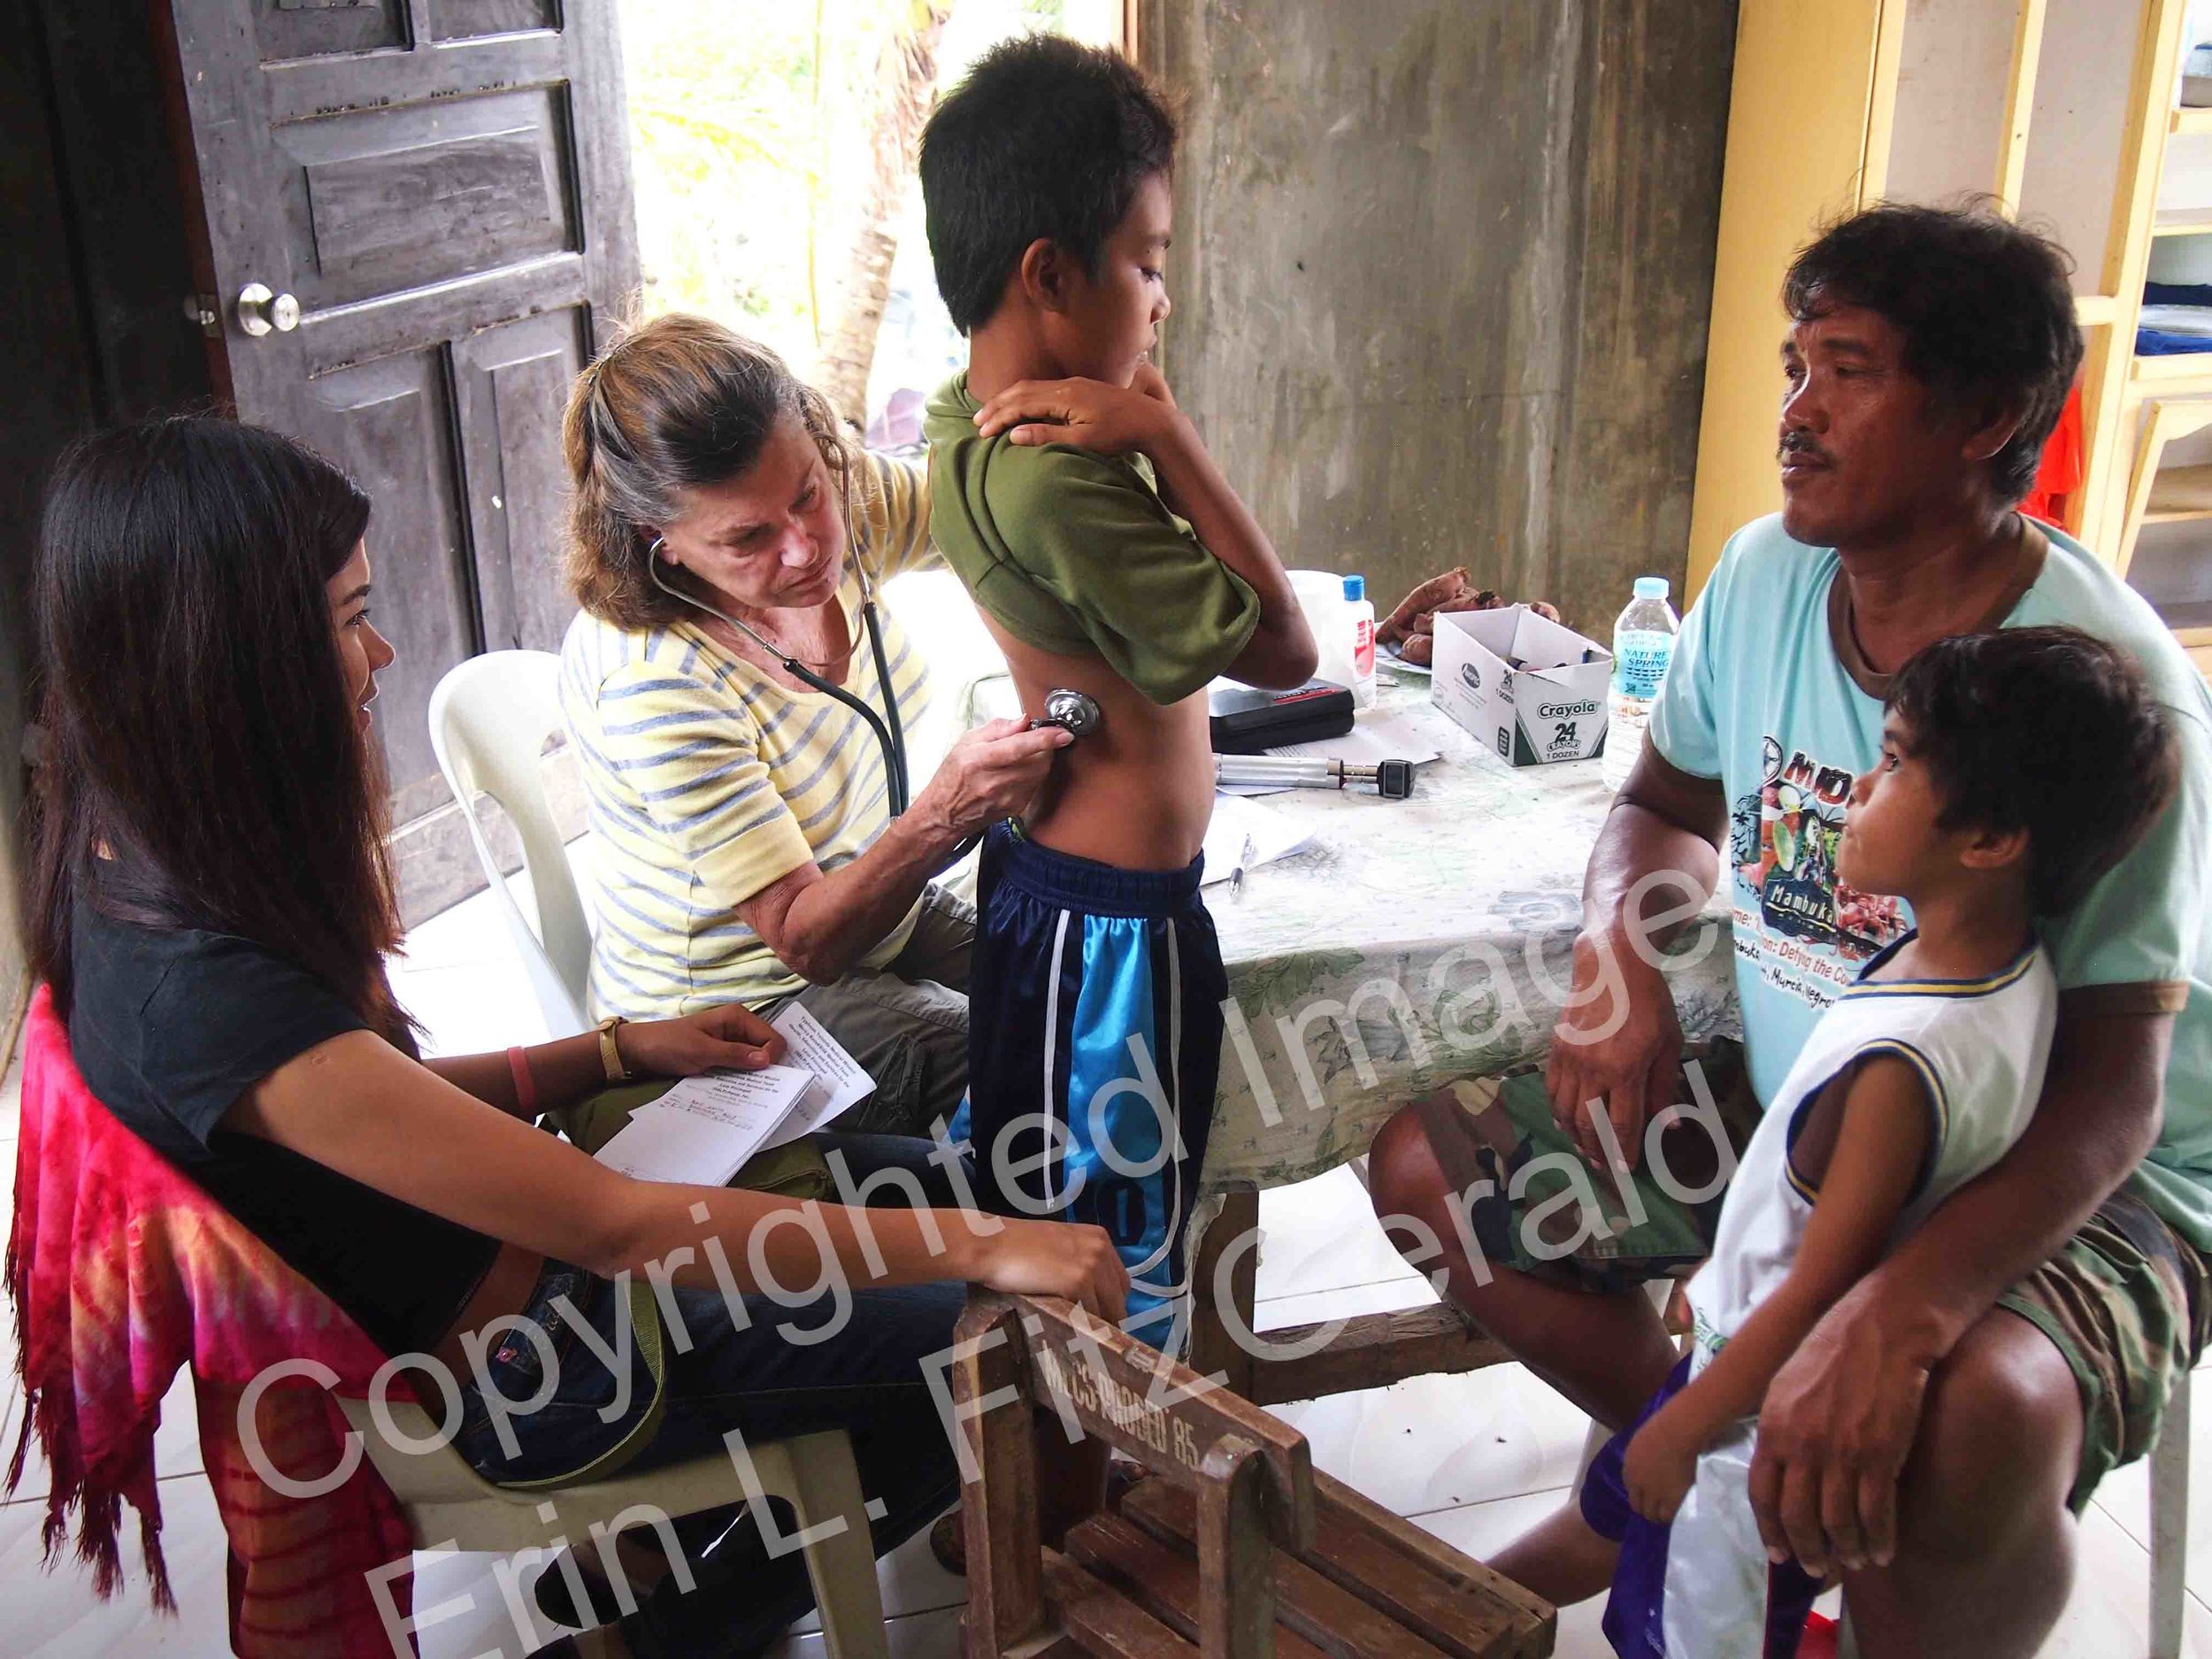   Nurse Practitioner Betty Woods evaluates families in a classroom converted to a clinic to serve locals devastated by Typhoon Haiyan.  